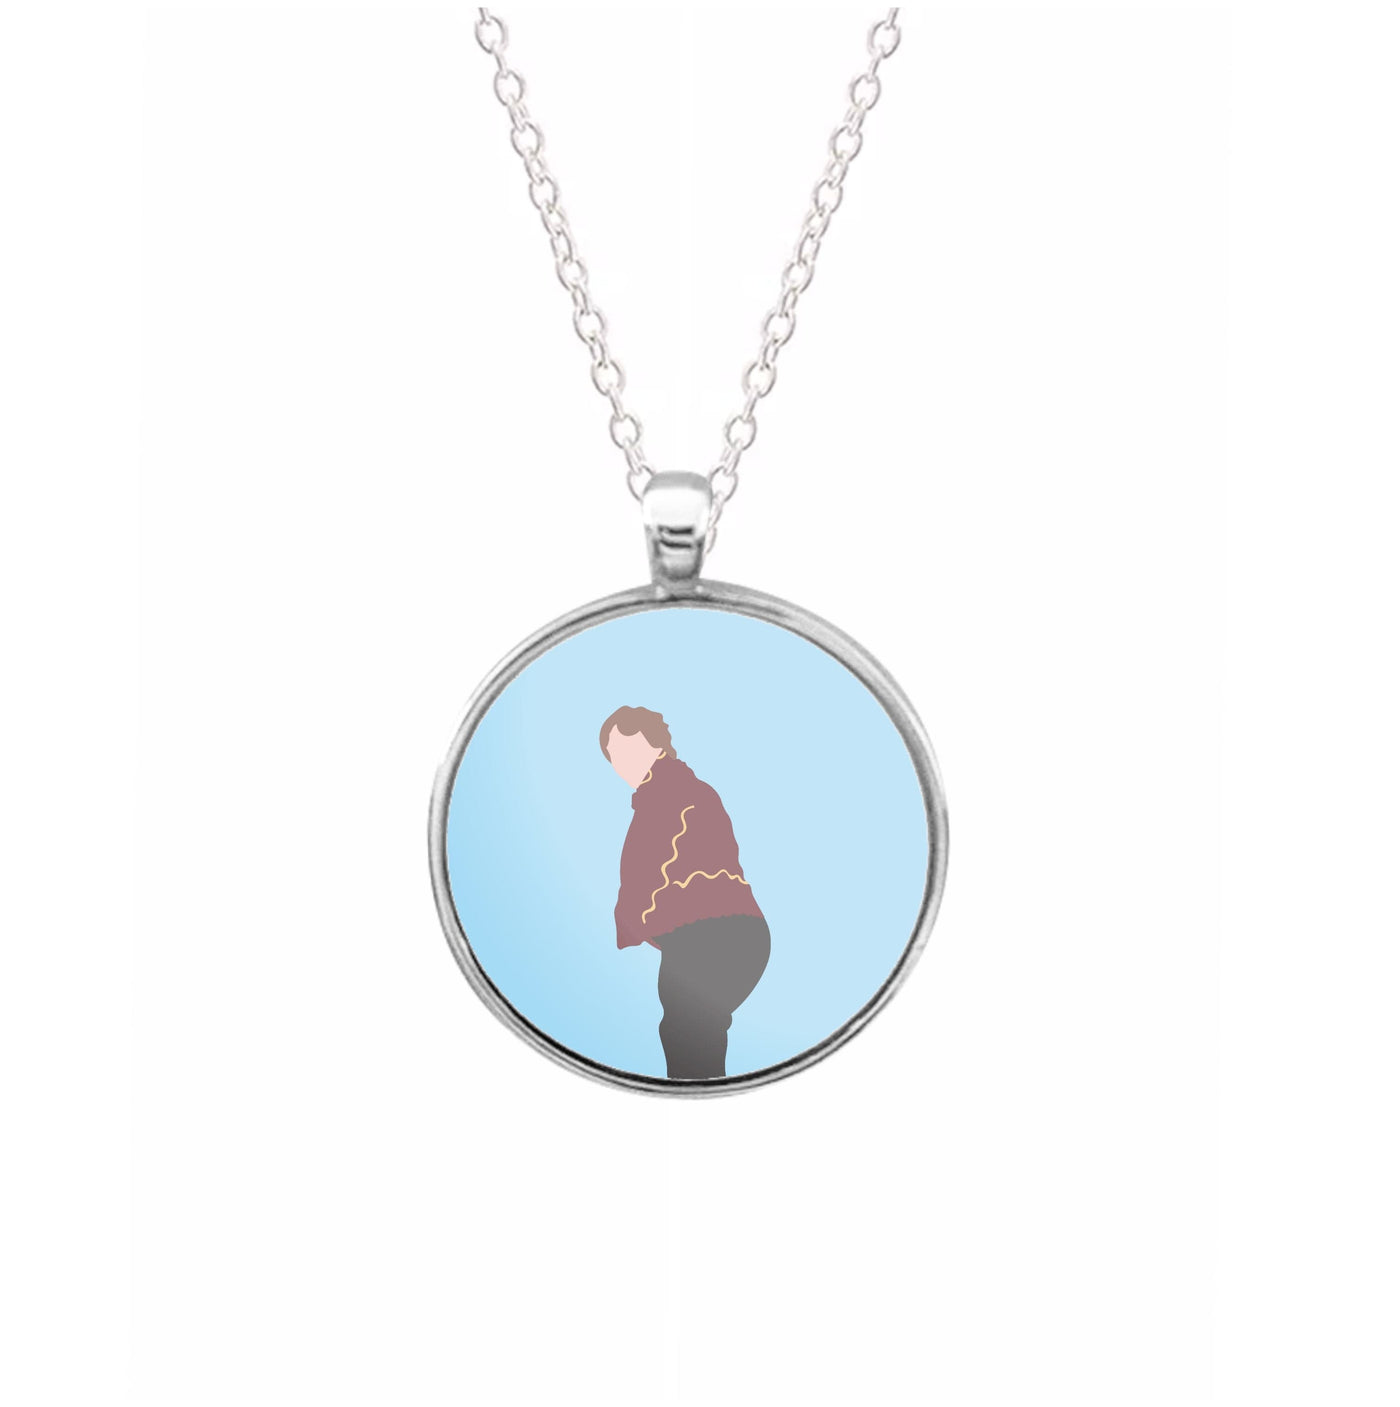 Pointing Out - Lewis Capaldi Necklace